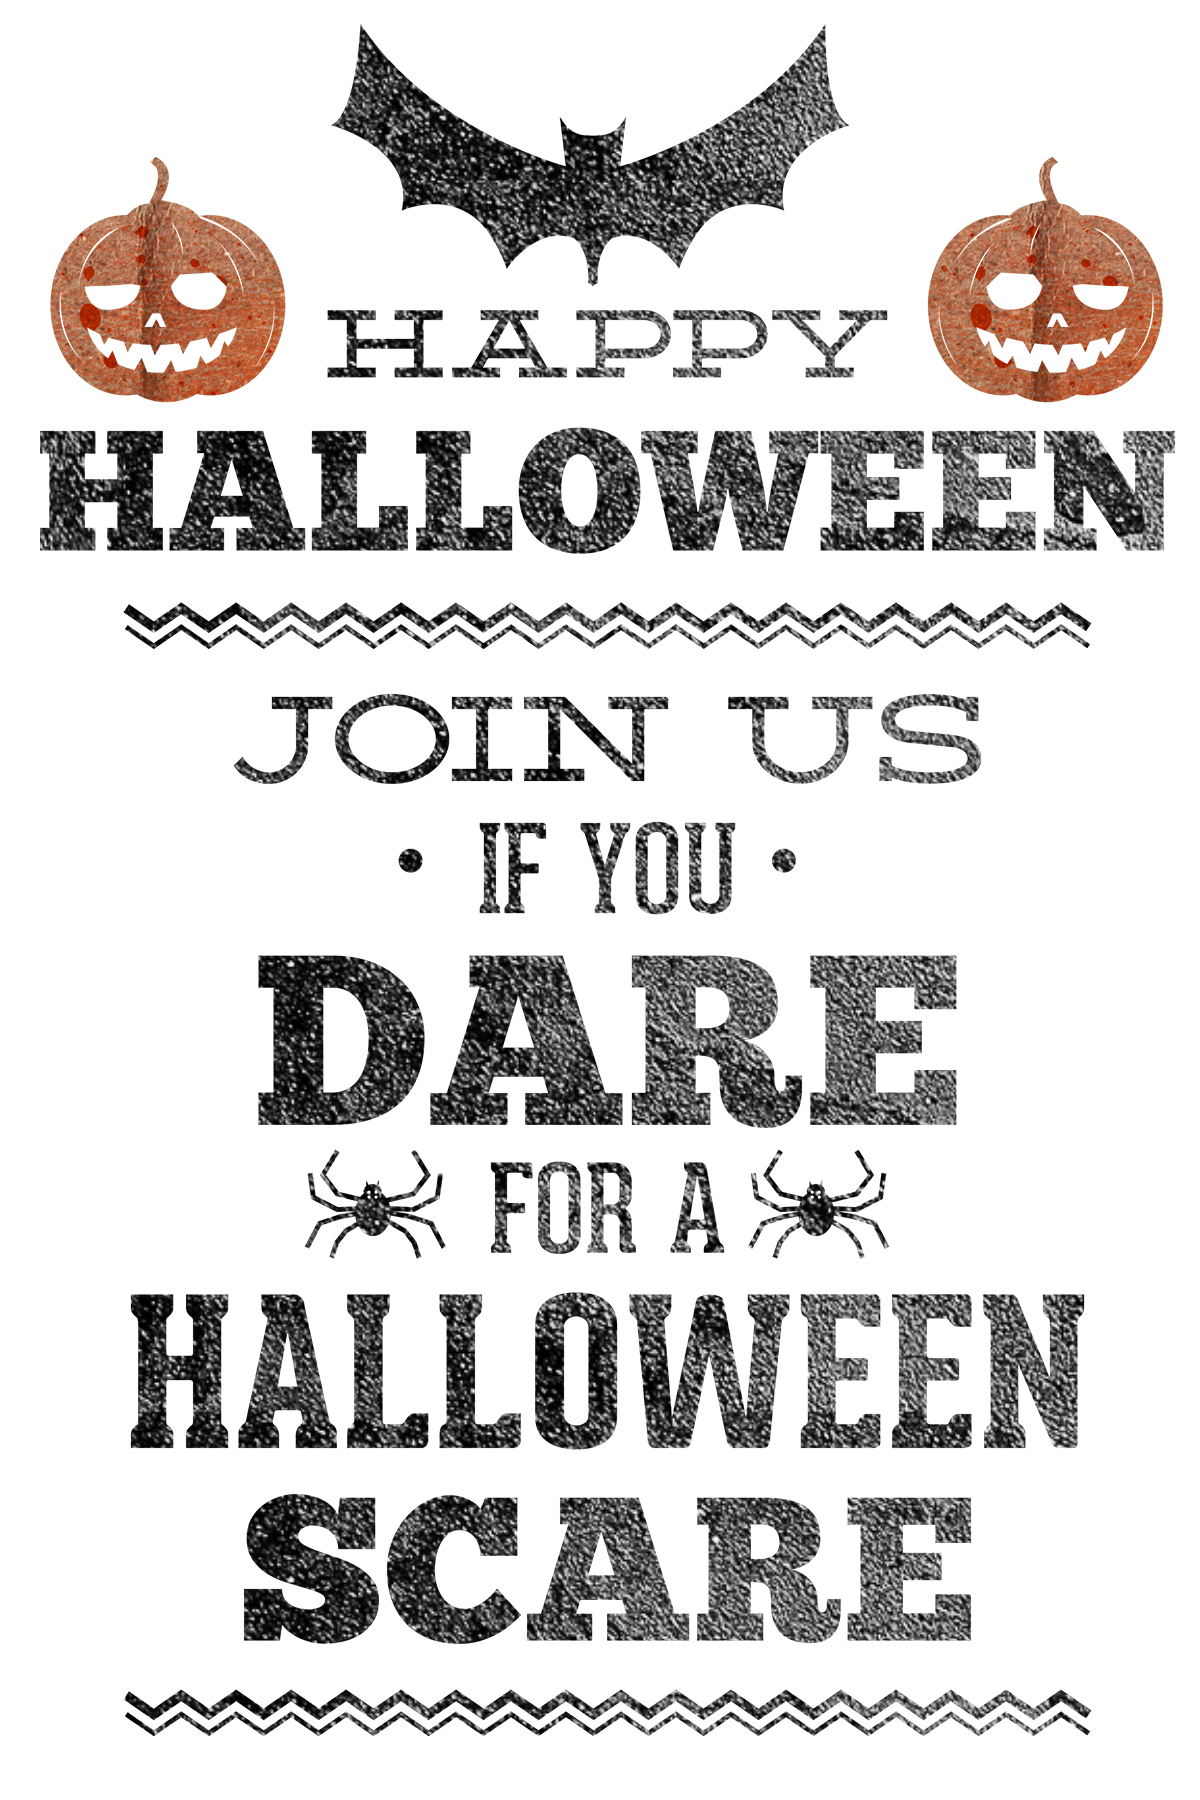 Invitation. Free Halloween Party Invitations - Techcommdood - Halloween Invitations Free Printable Black And White